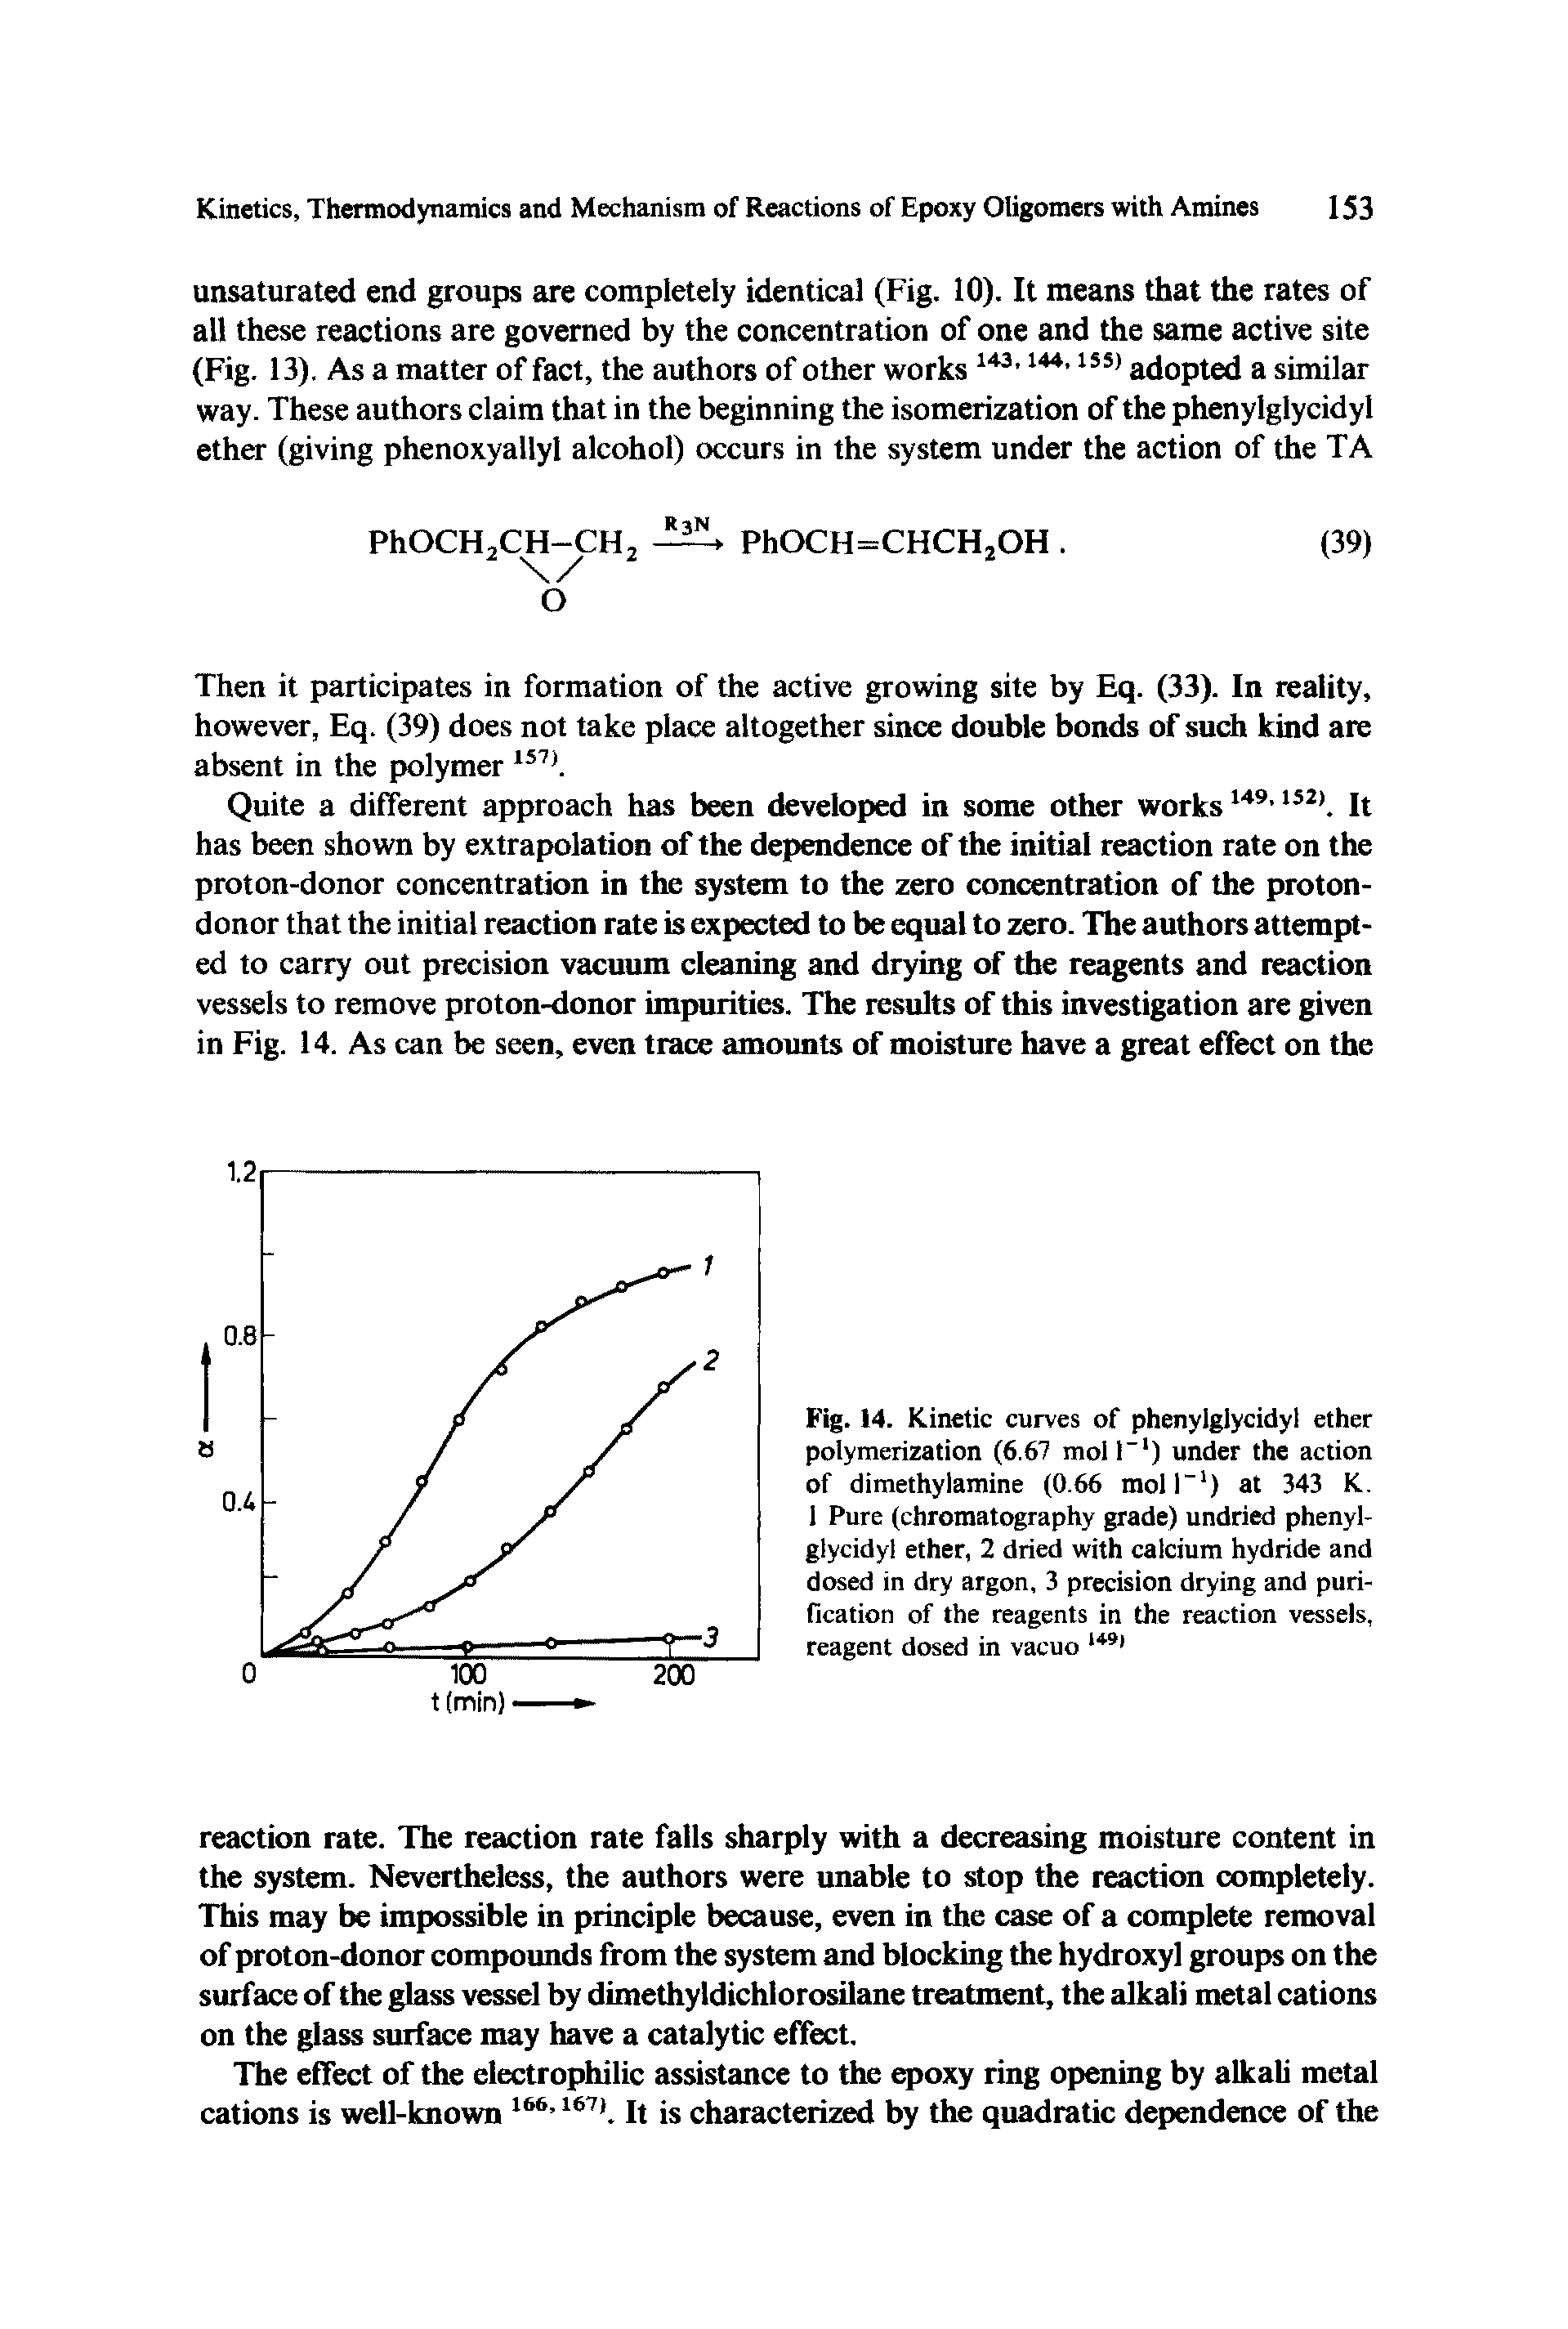 Fig. 14. Kinetic curves of phenylglycidyl ether polymerization (6.67 mol I-1) under the action of dimethylamine (0.66 moll-1) at 343 K. 1 Pure (chromatography grade) undried phenylglycidyl ether, 2 dried with calcium hydride and dosed in dry argon, 3 precision drying and purification of the reagents in the reaction vessels, reagent dosed in vacuo 1+91...